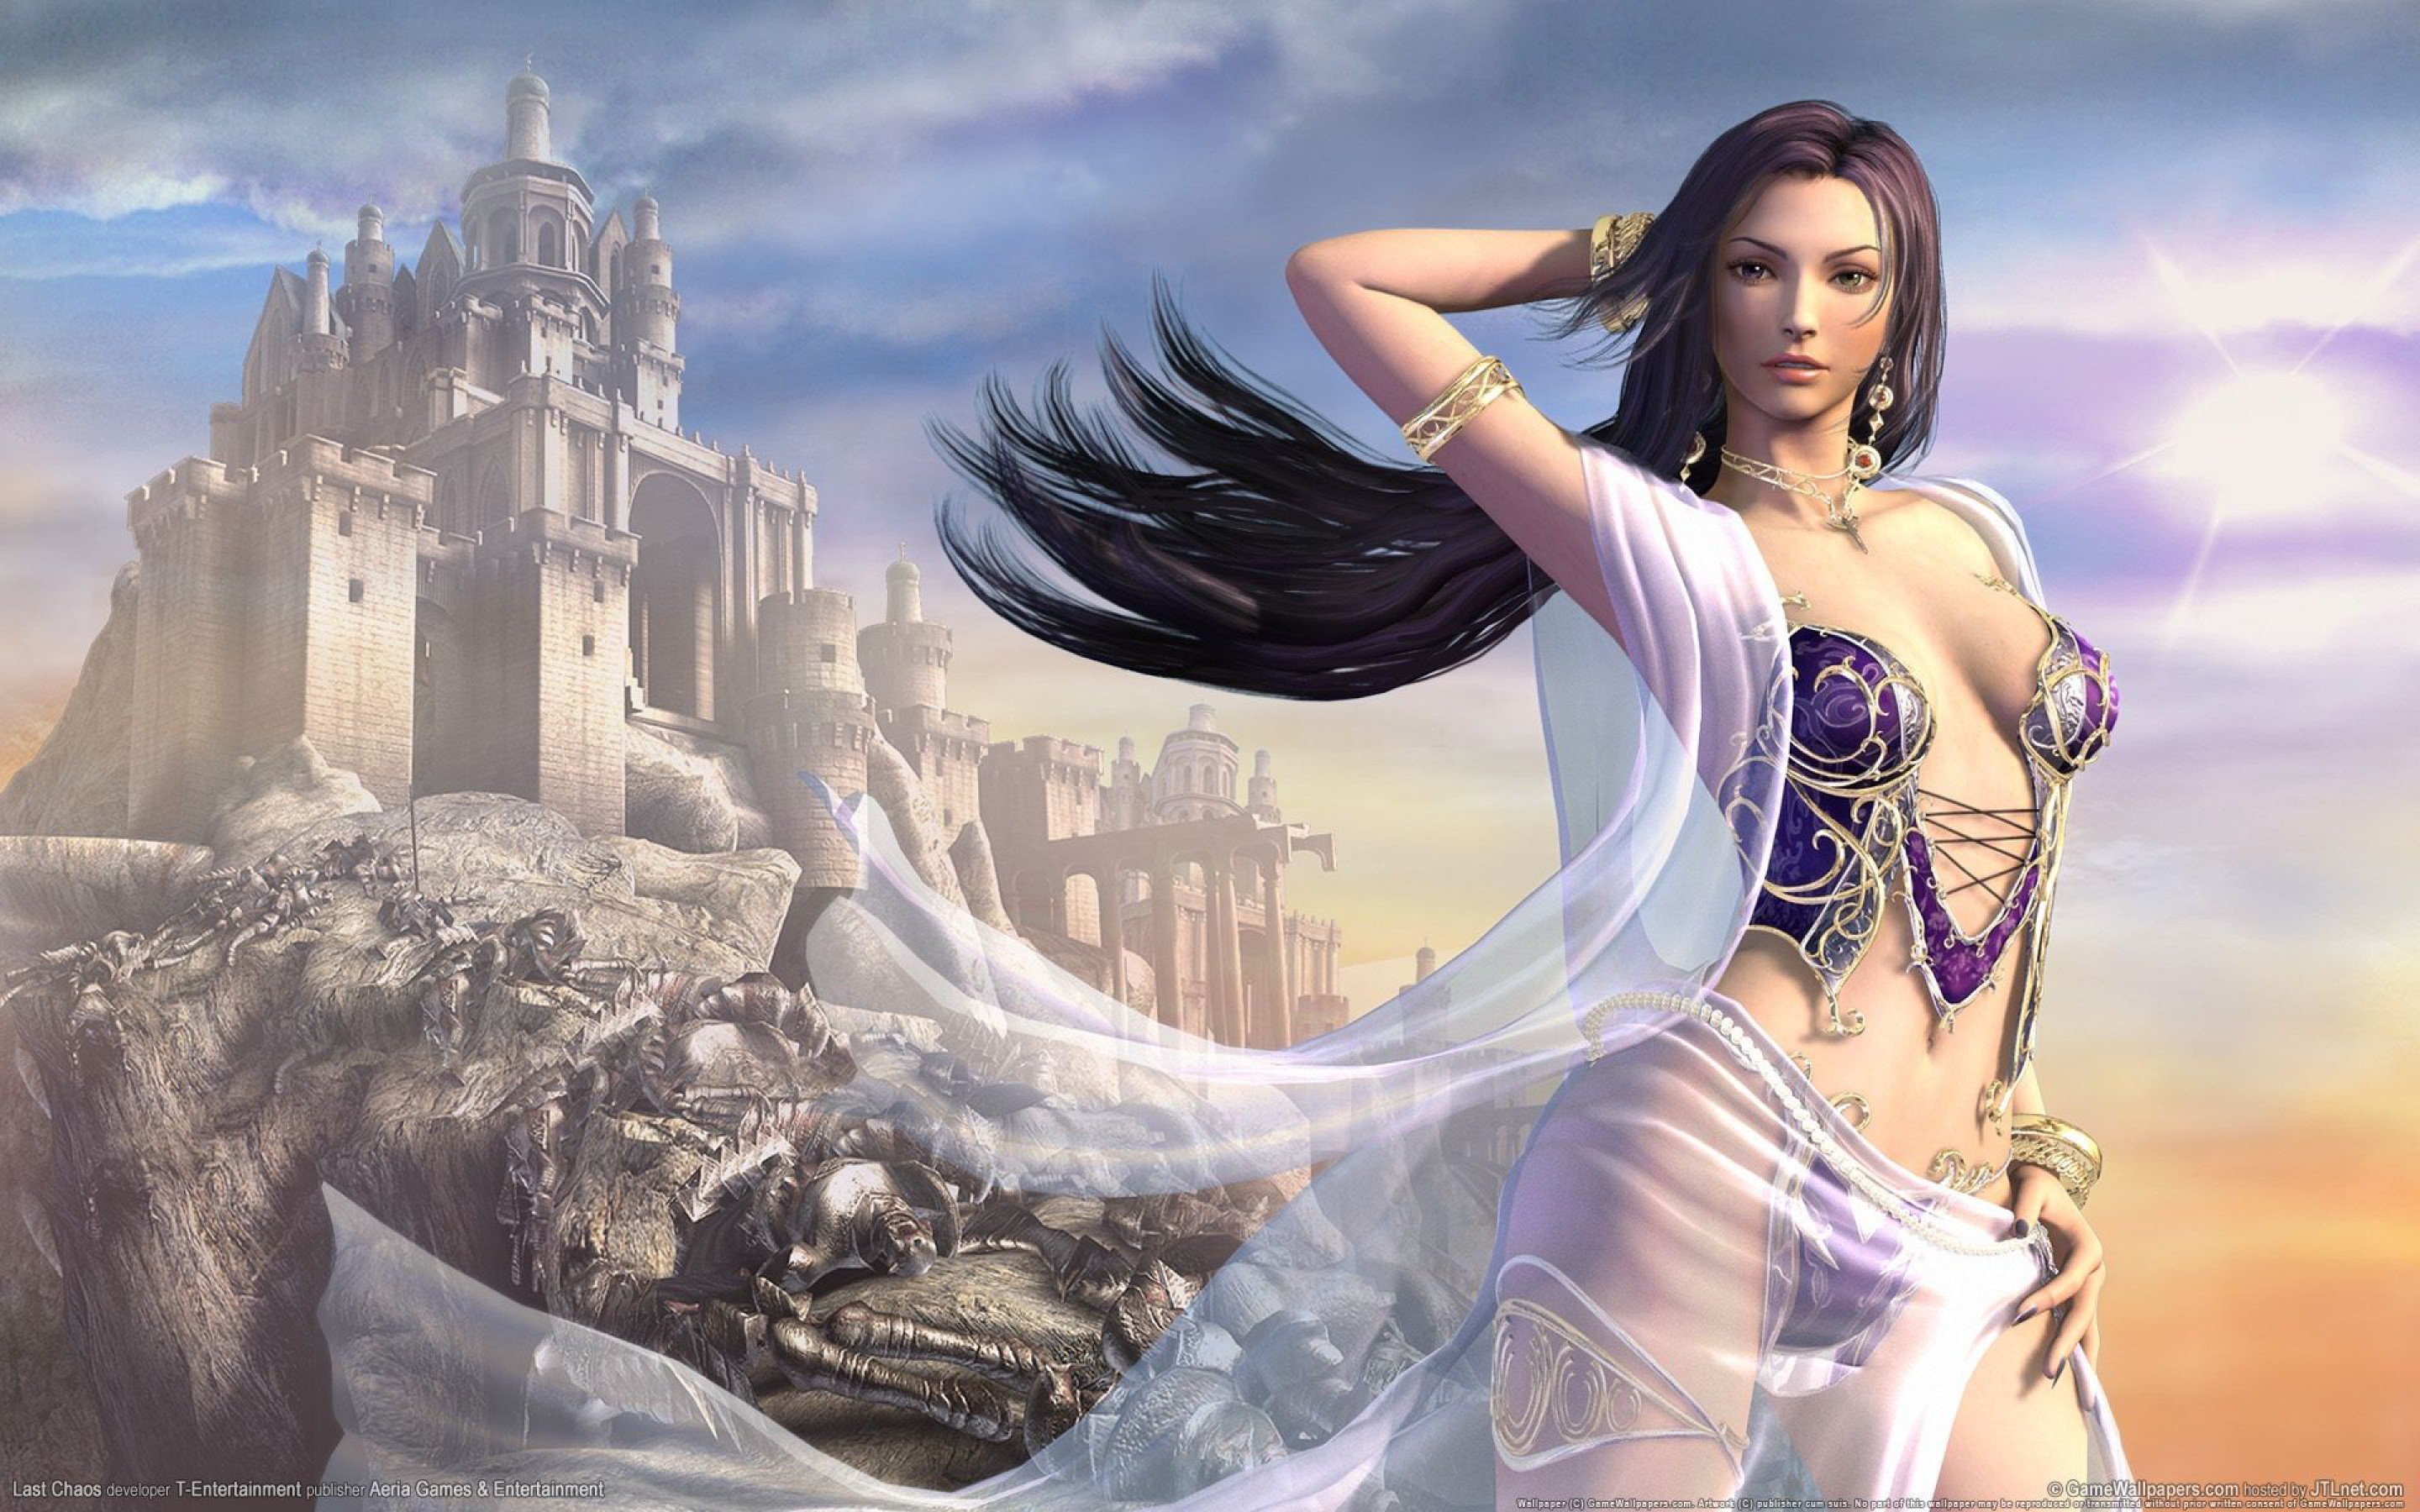 last, Chaos, Fantasy, Mmo, Rpg, Action, Fighting, 1lchaos, Action, Warrior, Dungeon, Adventure, Online, Babe, Girl, Girls, Castle Wallpaper